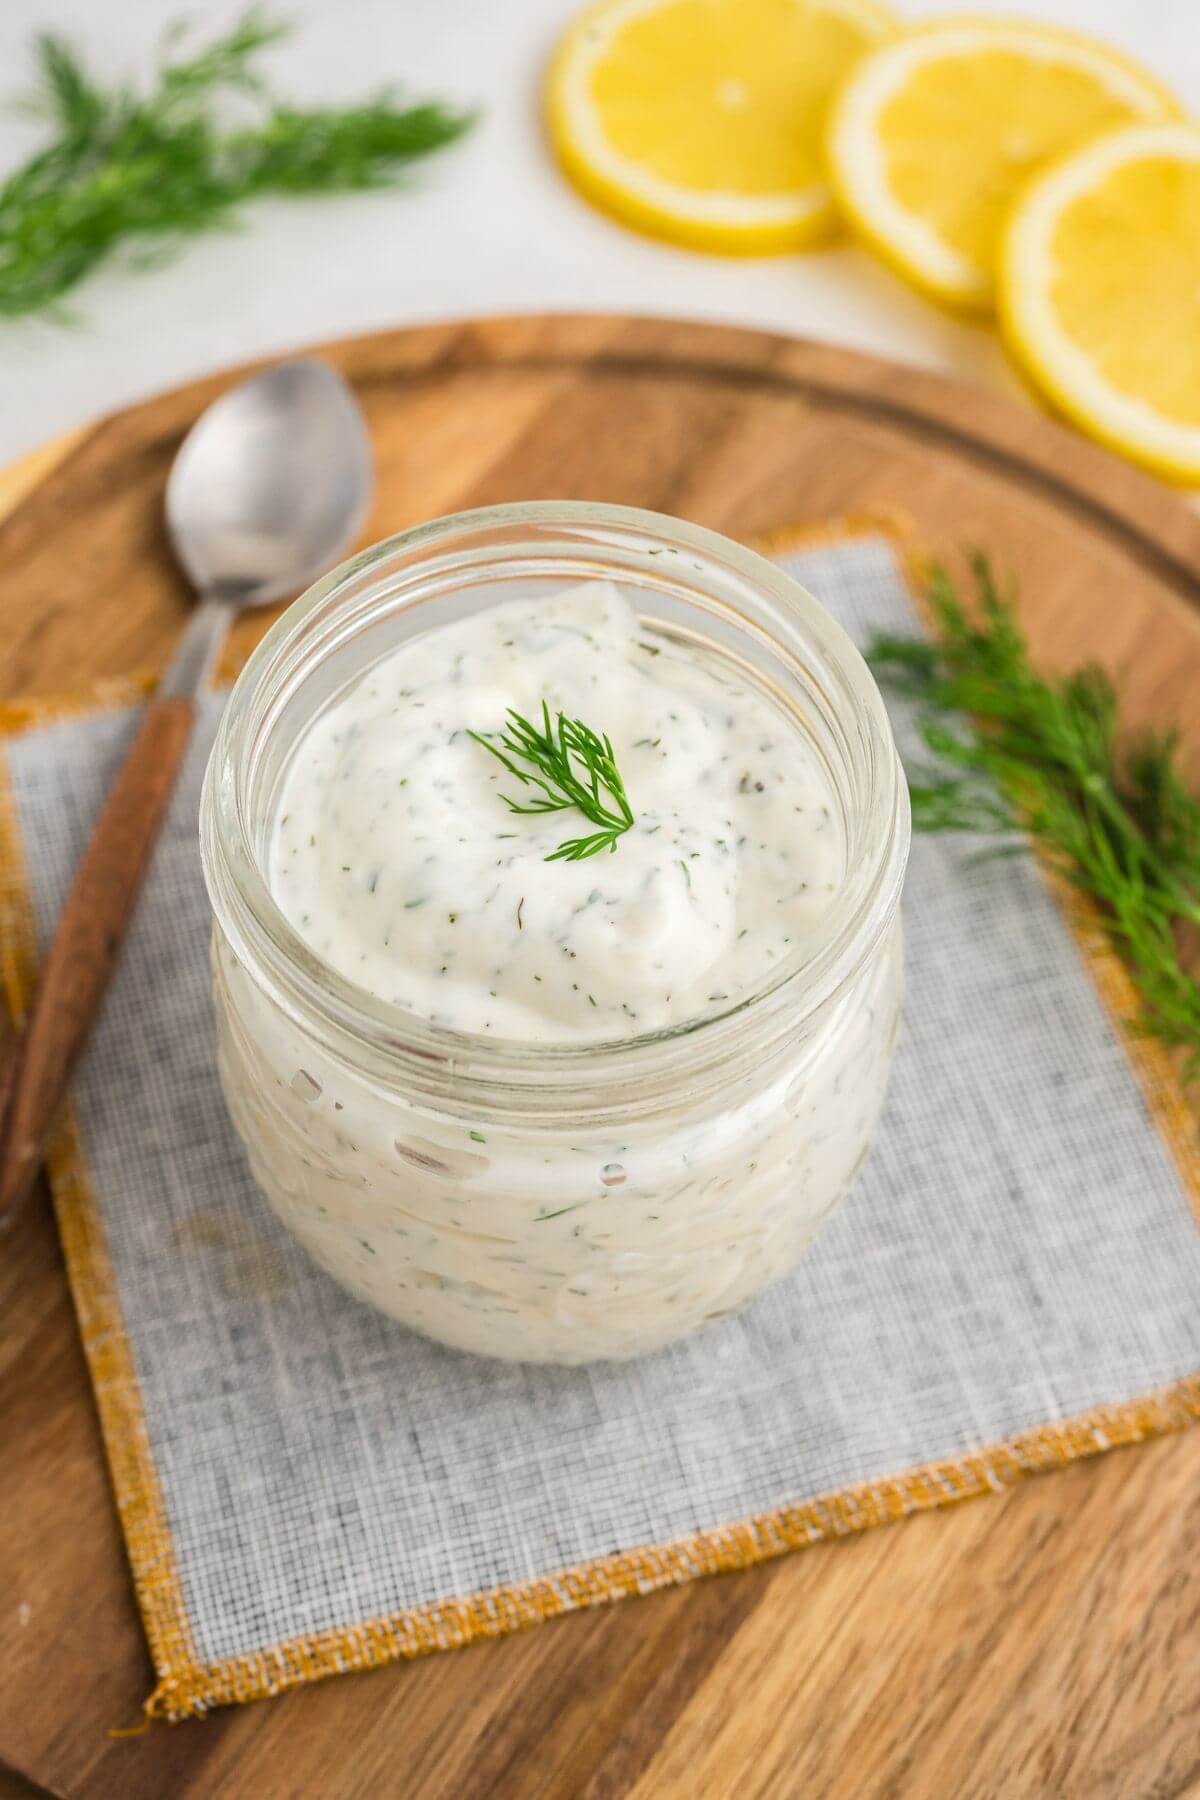 Lemon slices and fresh dill frame a small jar of white sauce with green specks on a serving board.